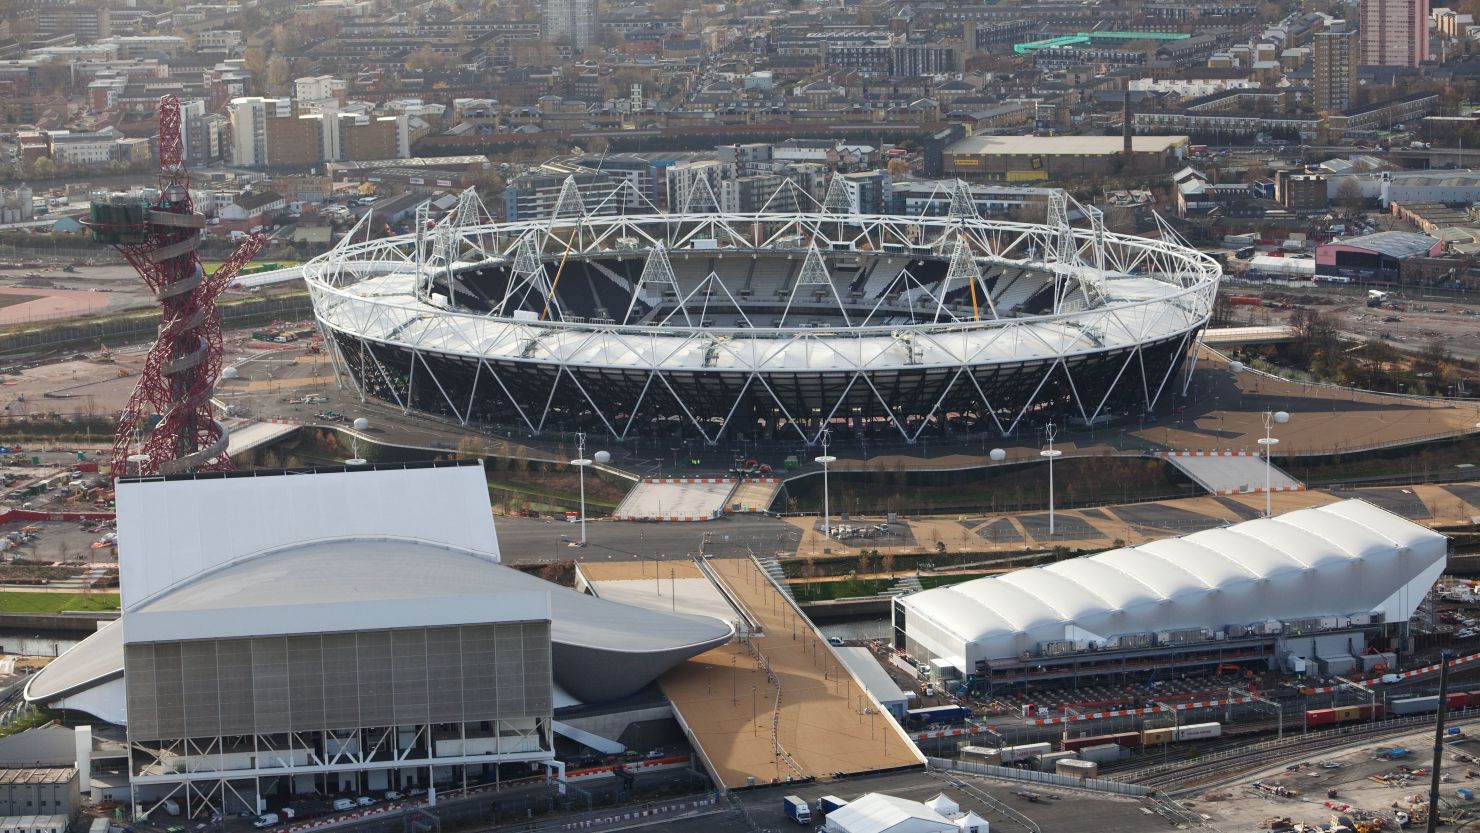 A UK government commitee says that the bill for the London 2012 Olympics will rise to £11 billion ($17.2 billion).